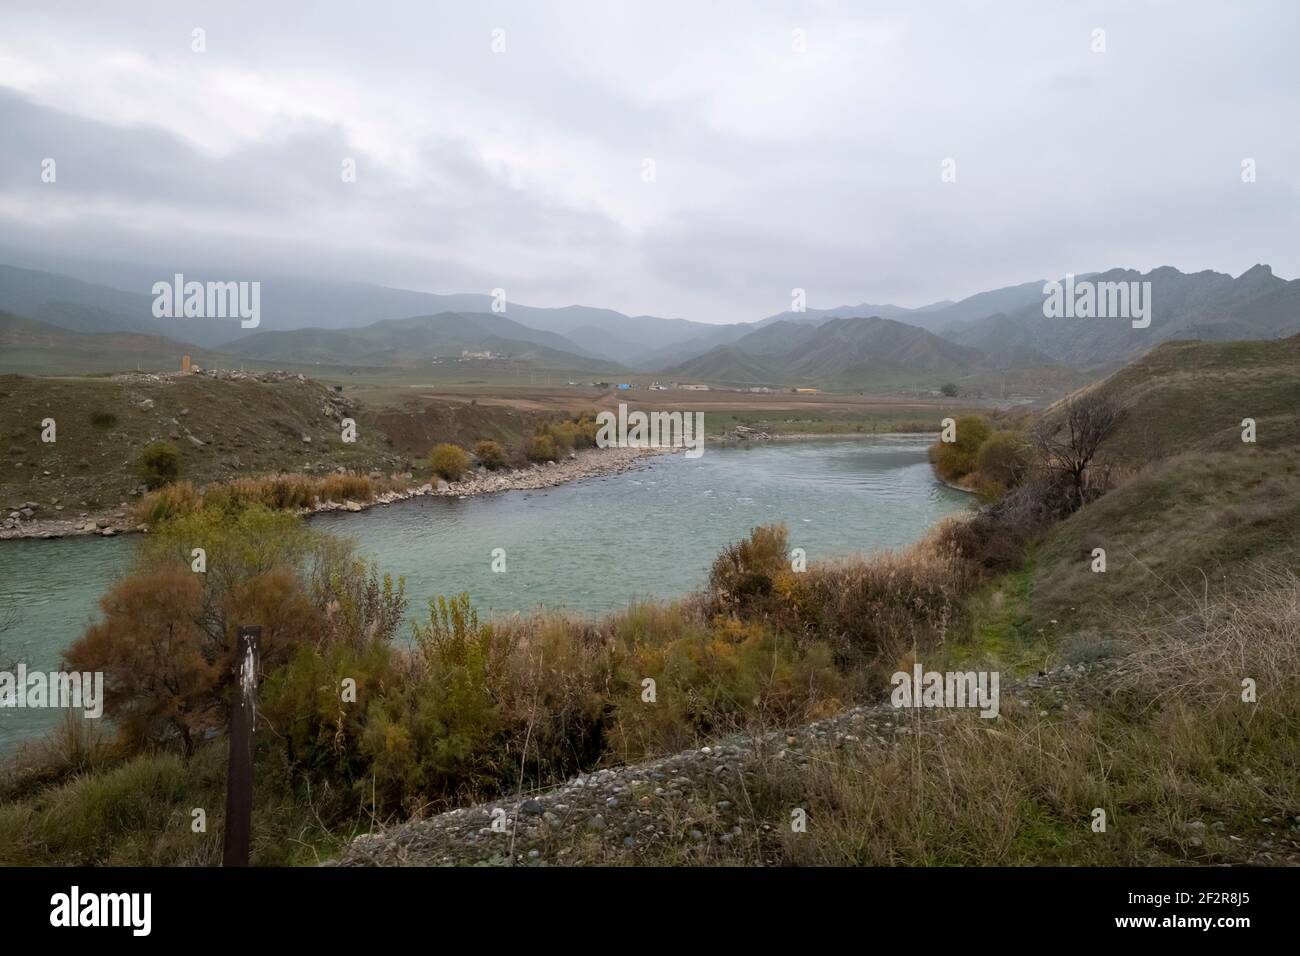 JABRAYIL, AZERBAIJAN - DECEMBER 15: View of the Aras or Araxes or Araks river which flows along the border between Azerbaijan and Iran on December 15, 2020. Aras river borders territory which was controlled by ethnic Armenian authorities in Azerbaijan adjacent to Nagorno-Karabakh and was returned to Azerbaijani control as part of an agreement that ended the 2020 Nagorno-Karabakh War. Stock Photo